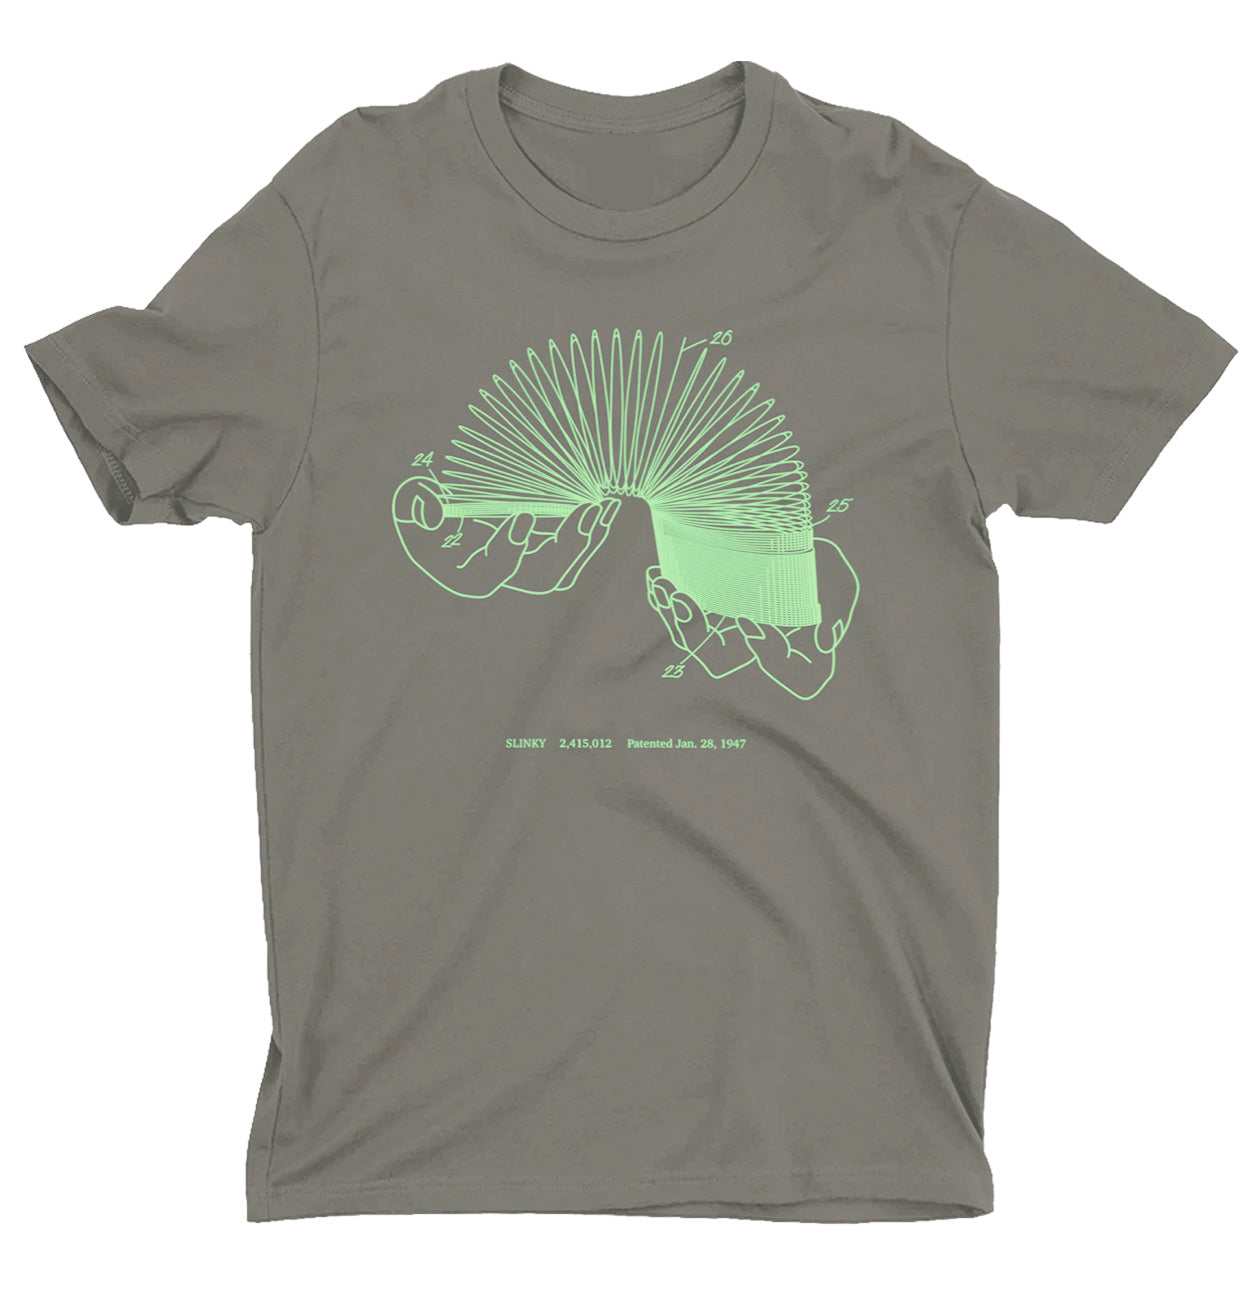 Slinky Patent T-Shirt - Charcoal with Electric Green Ink